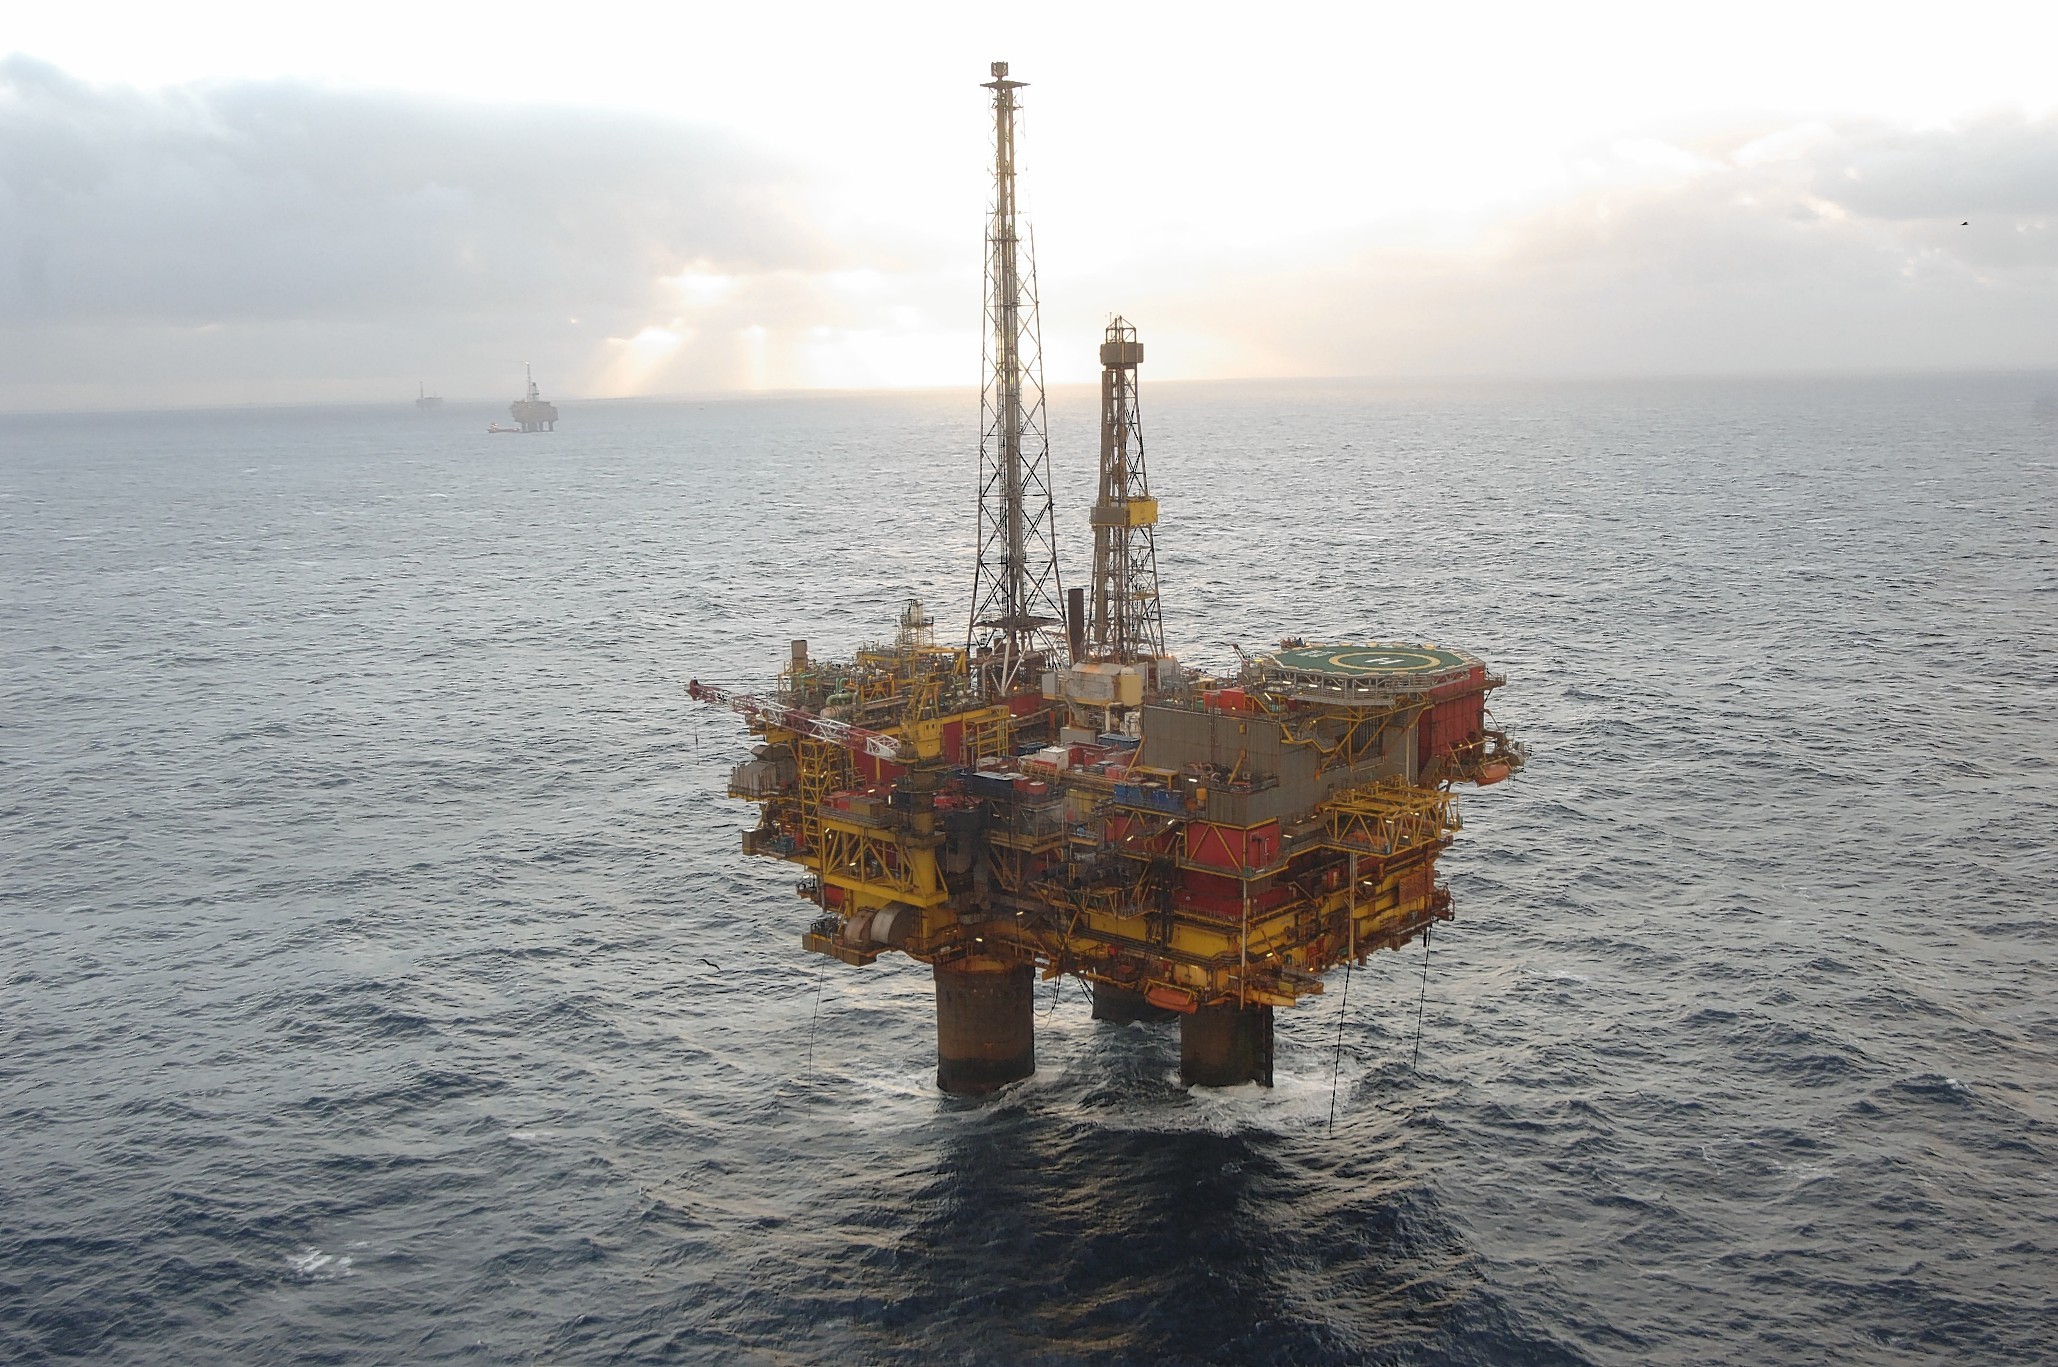 Aerial photography of Shell's Brent Delta Platform in the Northern North Sea, which is now being decommissioned